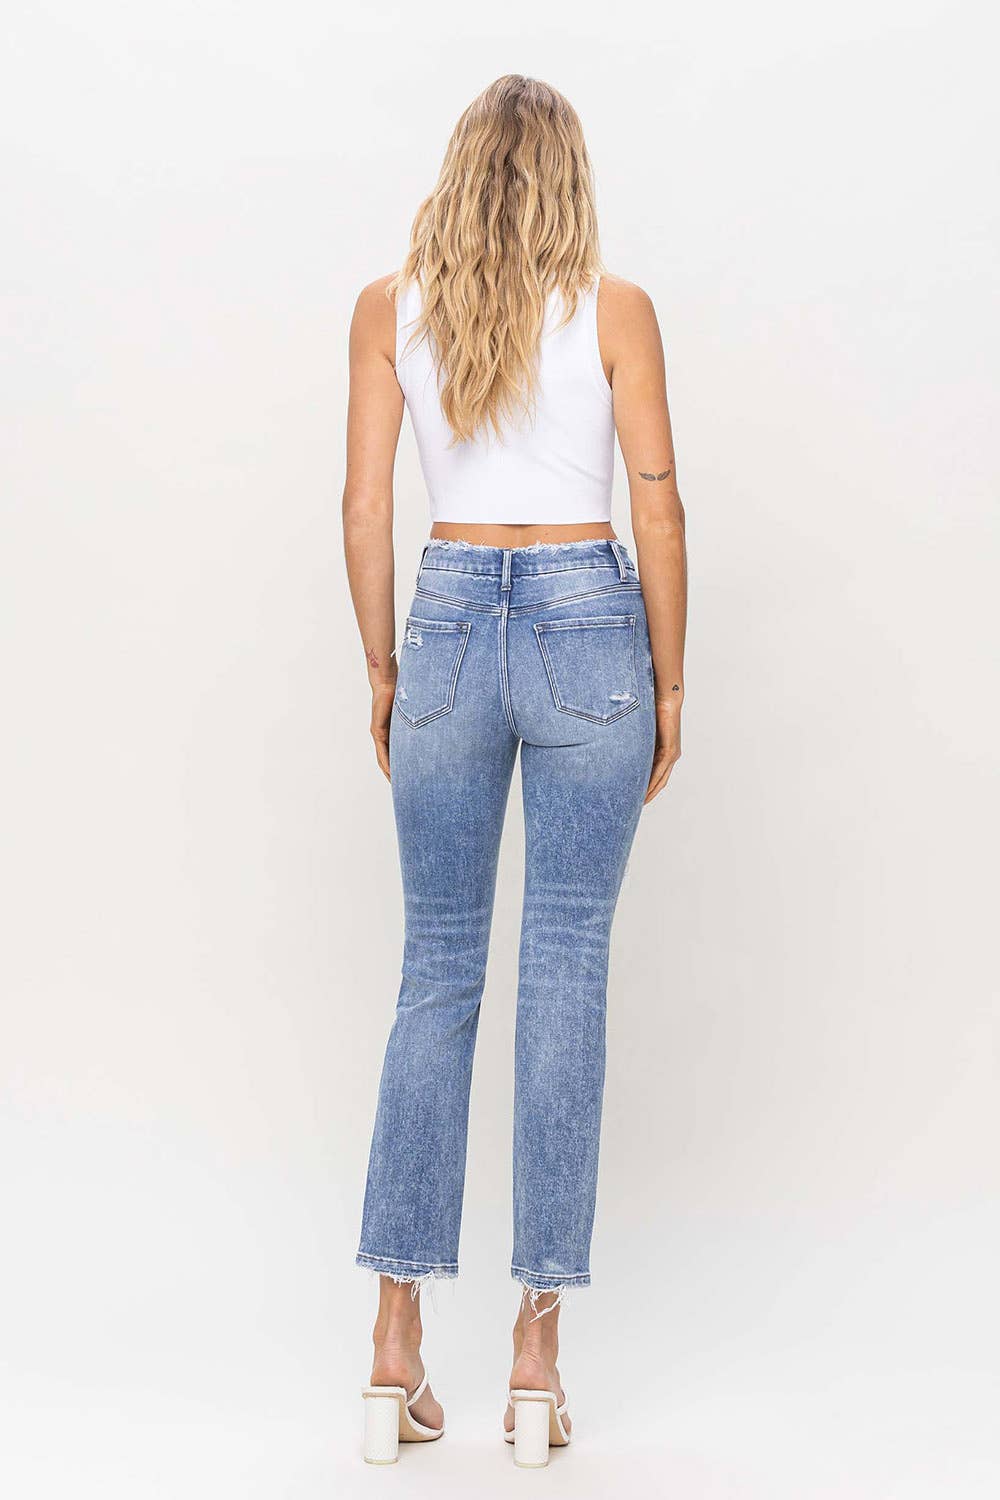 FLYING MONKEY - HIGH RISE CROP SLIM STRAIGHT JEAN F5104: CONVENIENTLY / 26